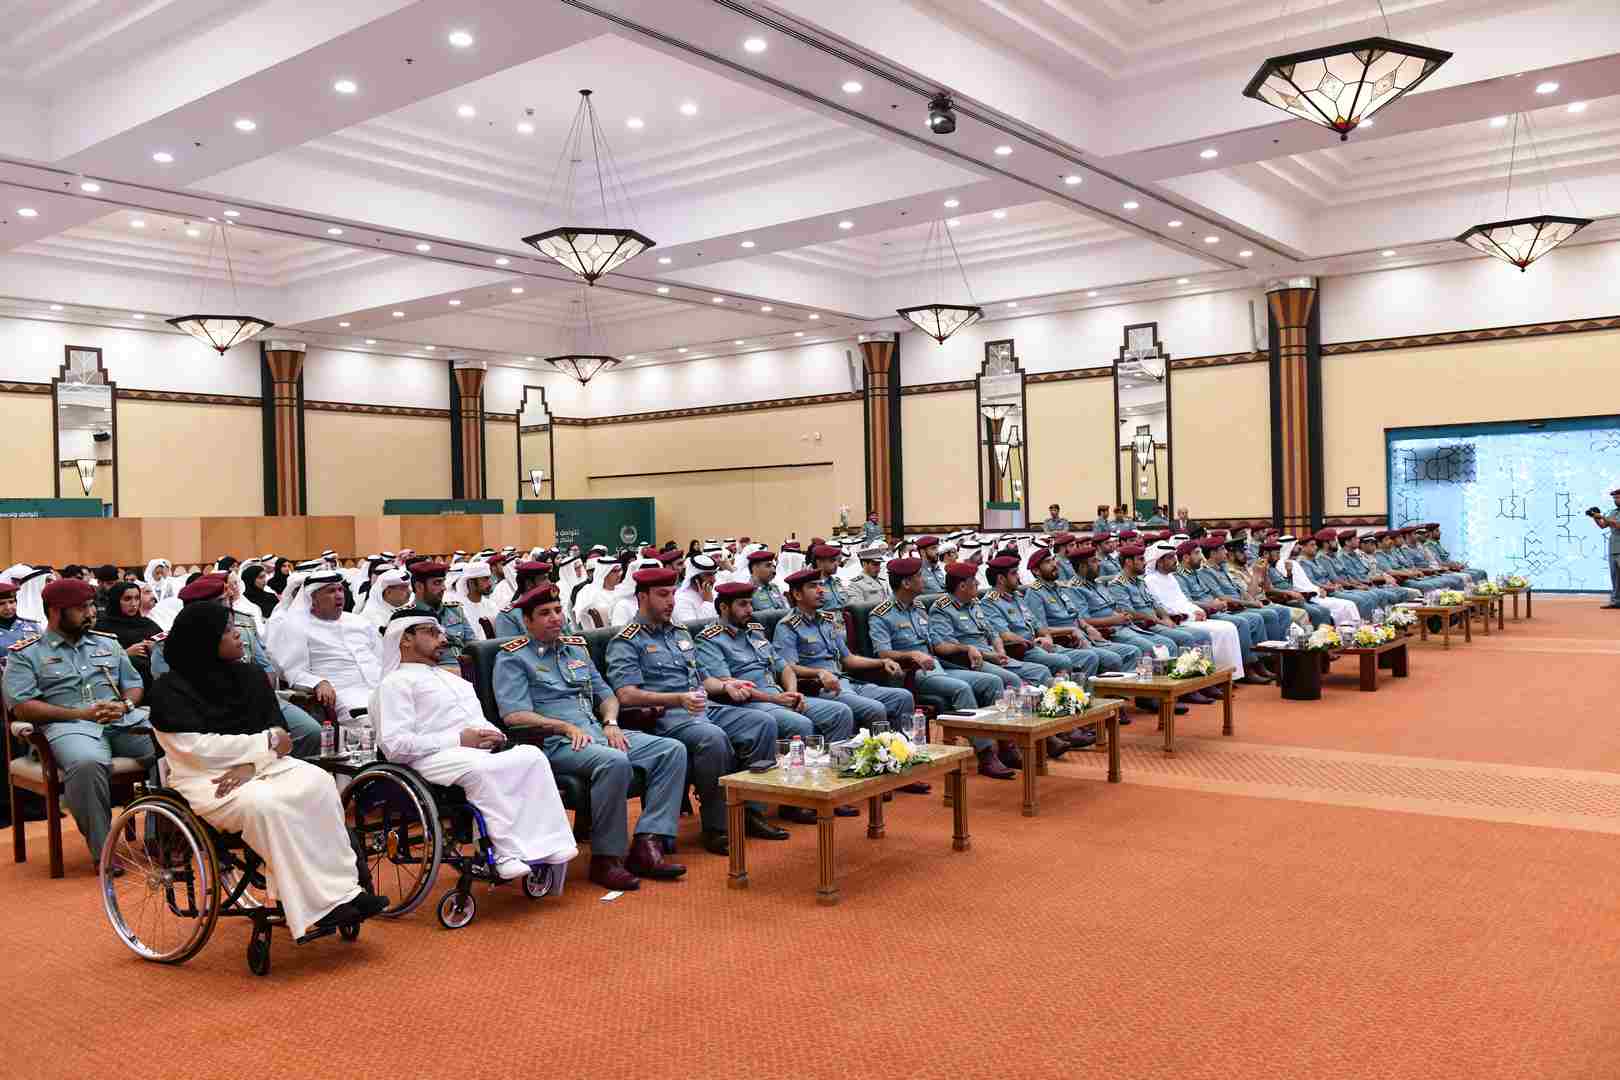 HONORS POLICE LEADERSHIPS, SPEAKERS AND TEAMS OF THE MOI RAMADAN COUNCILS